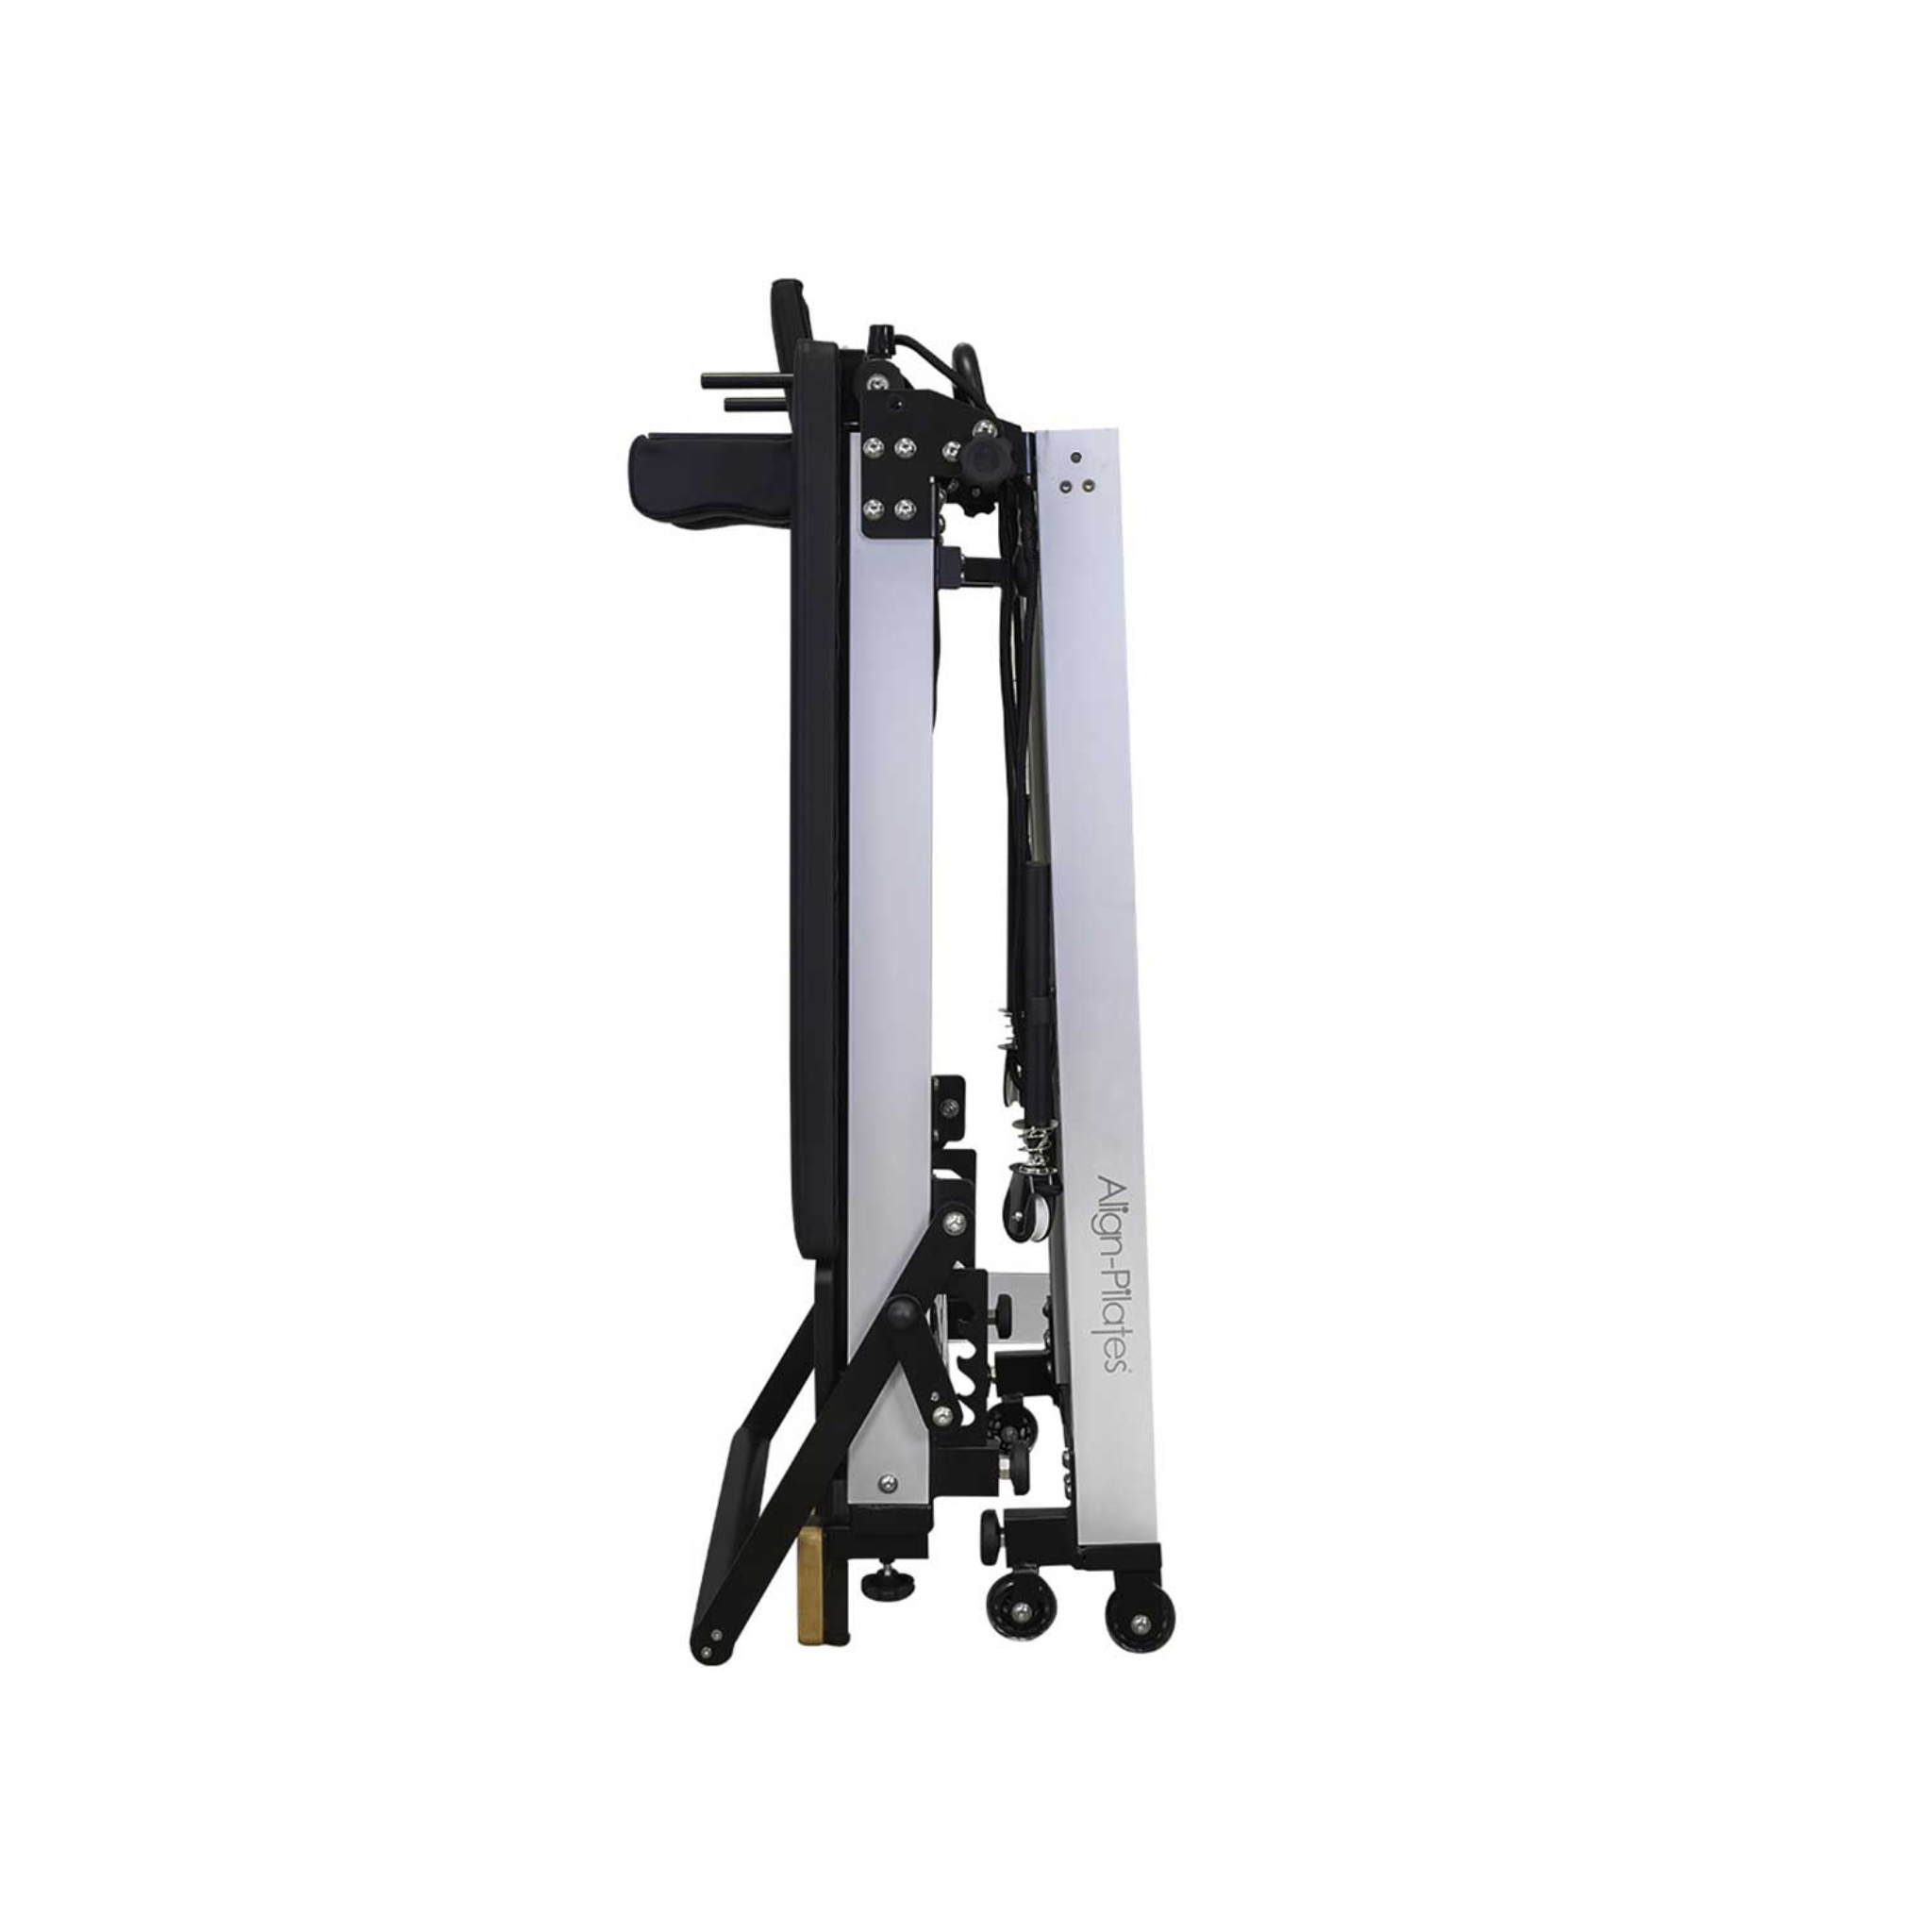 Foldable Pilates Reformer Set P3 for sale【how much】At home